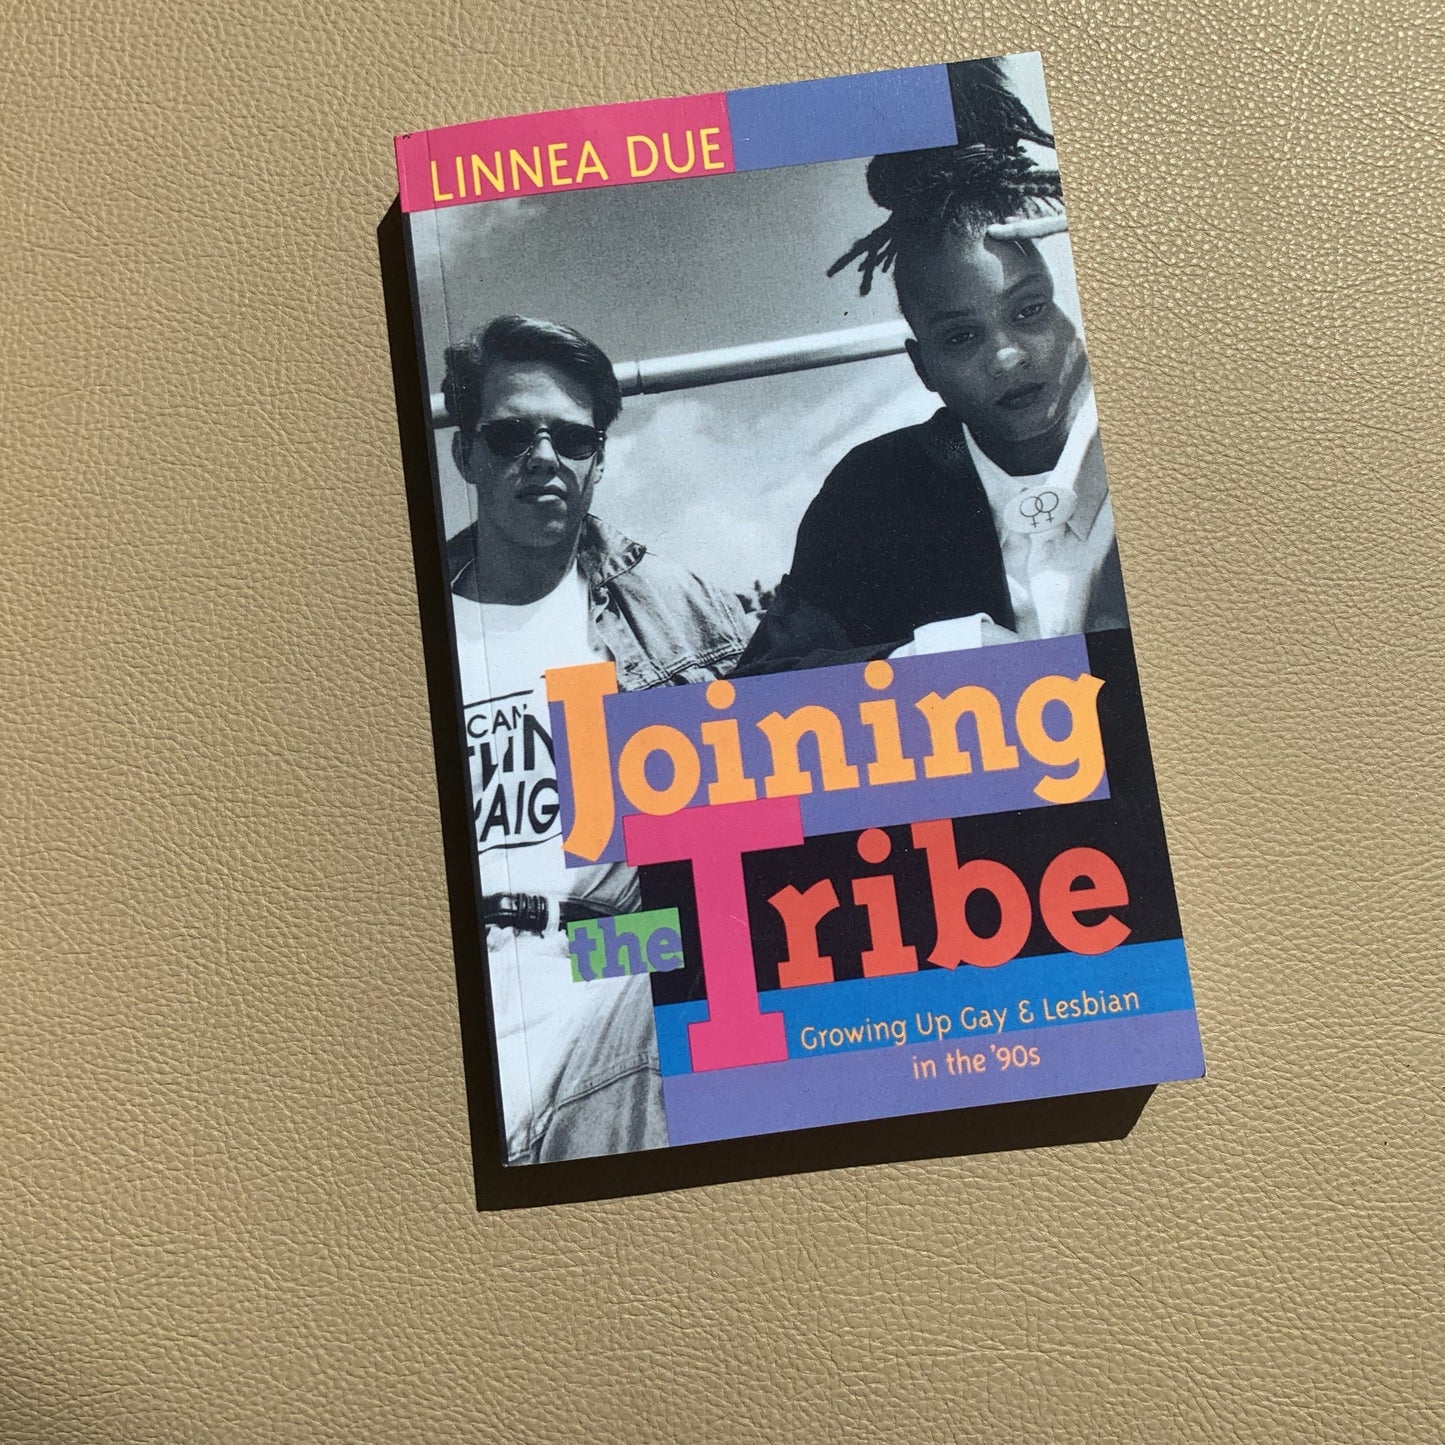 Linnea Due "Joining The Tribe"